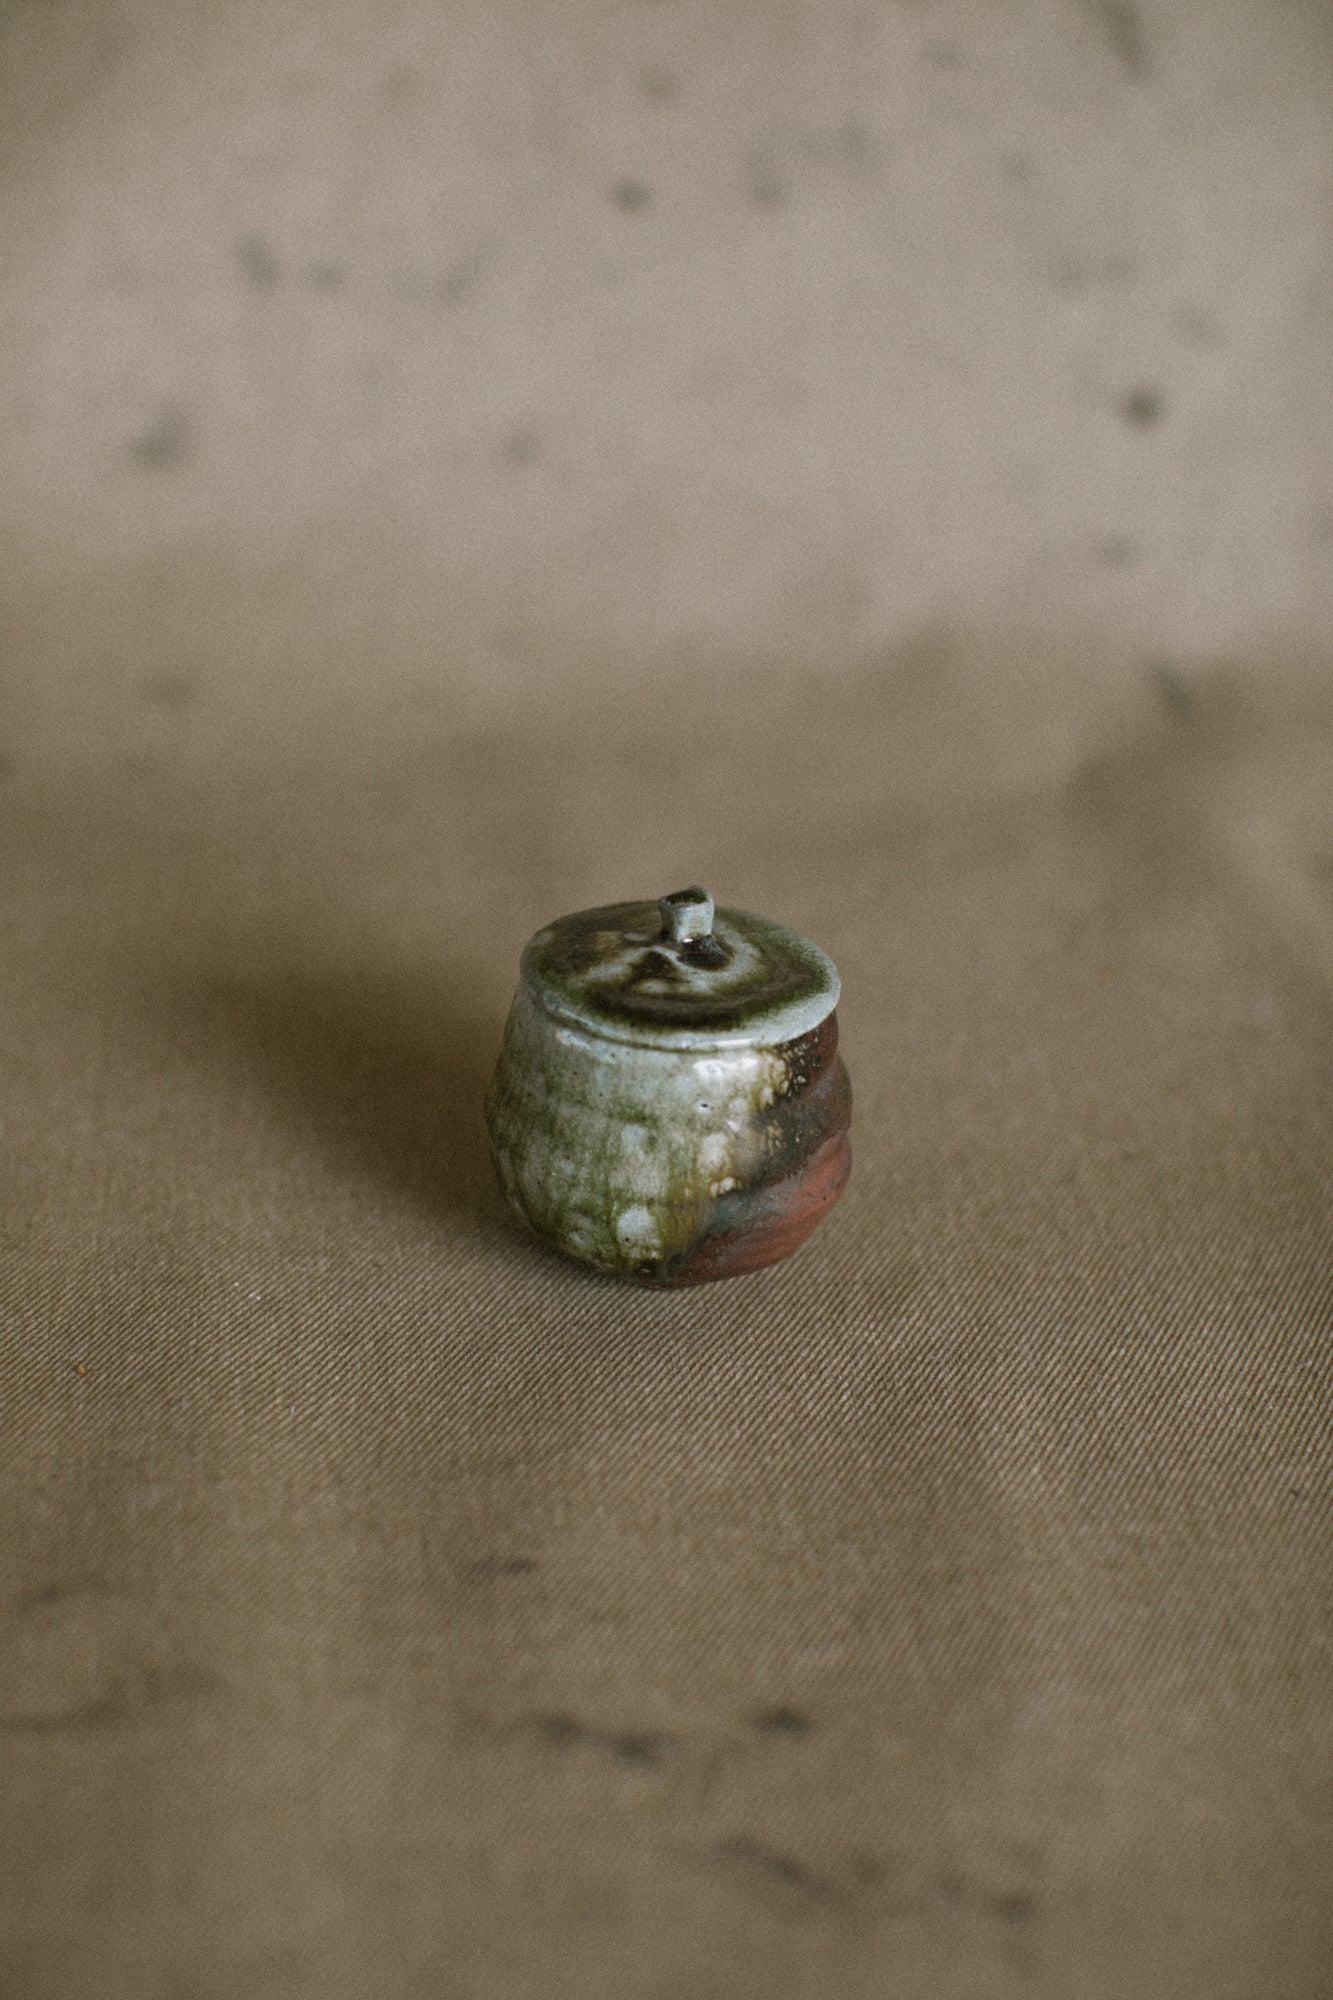 A brown and green wood fired jar on a beige fabric background. This wheel thrown jar is made from an Iron rich Australian stoneware clay with dark green wood ash covering one side.